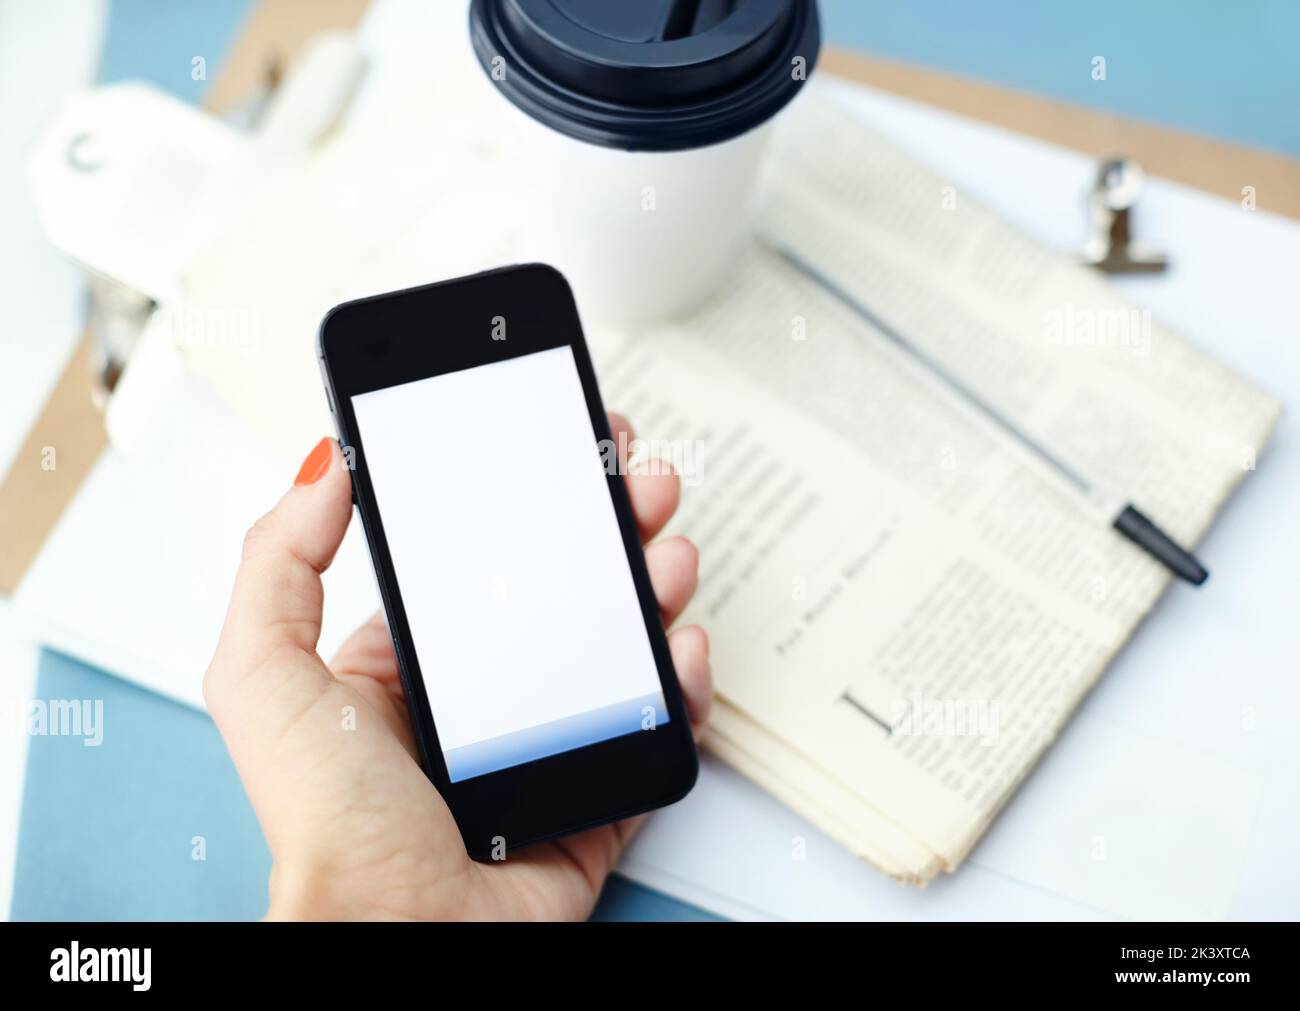 Checking messages between sips of coffee. Hand holding a smartphone with disposable cup, pen, binder clip, newspaper and clipboard. Stock Photo